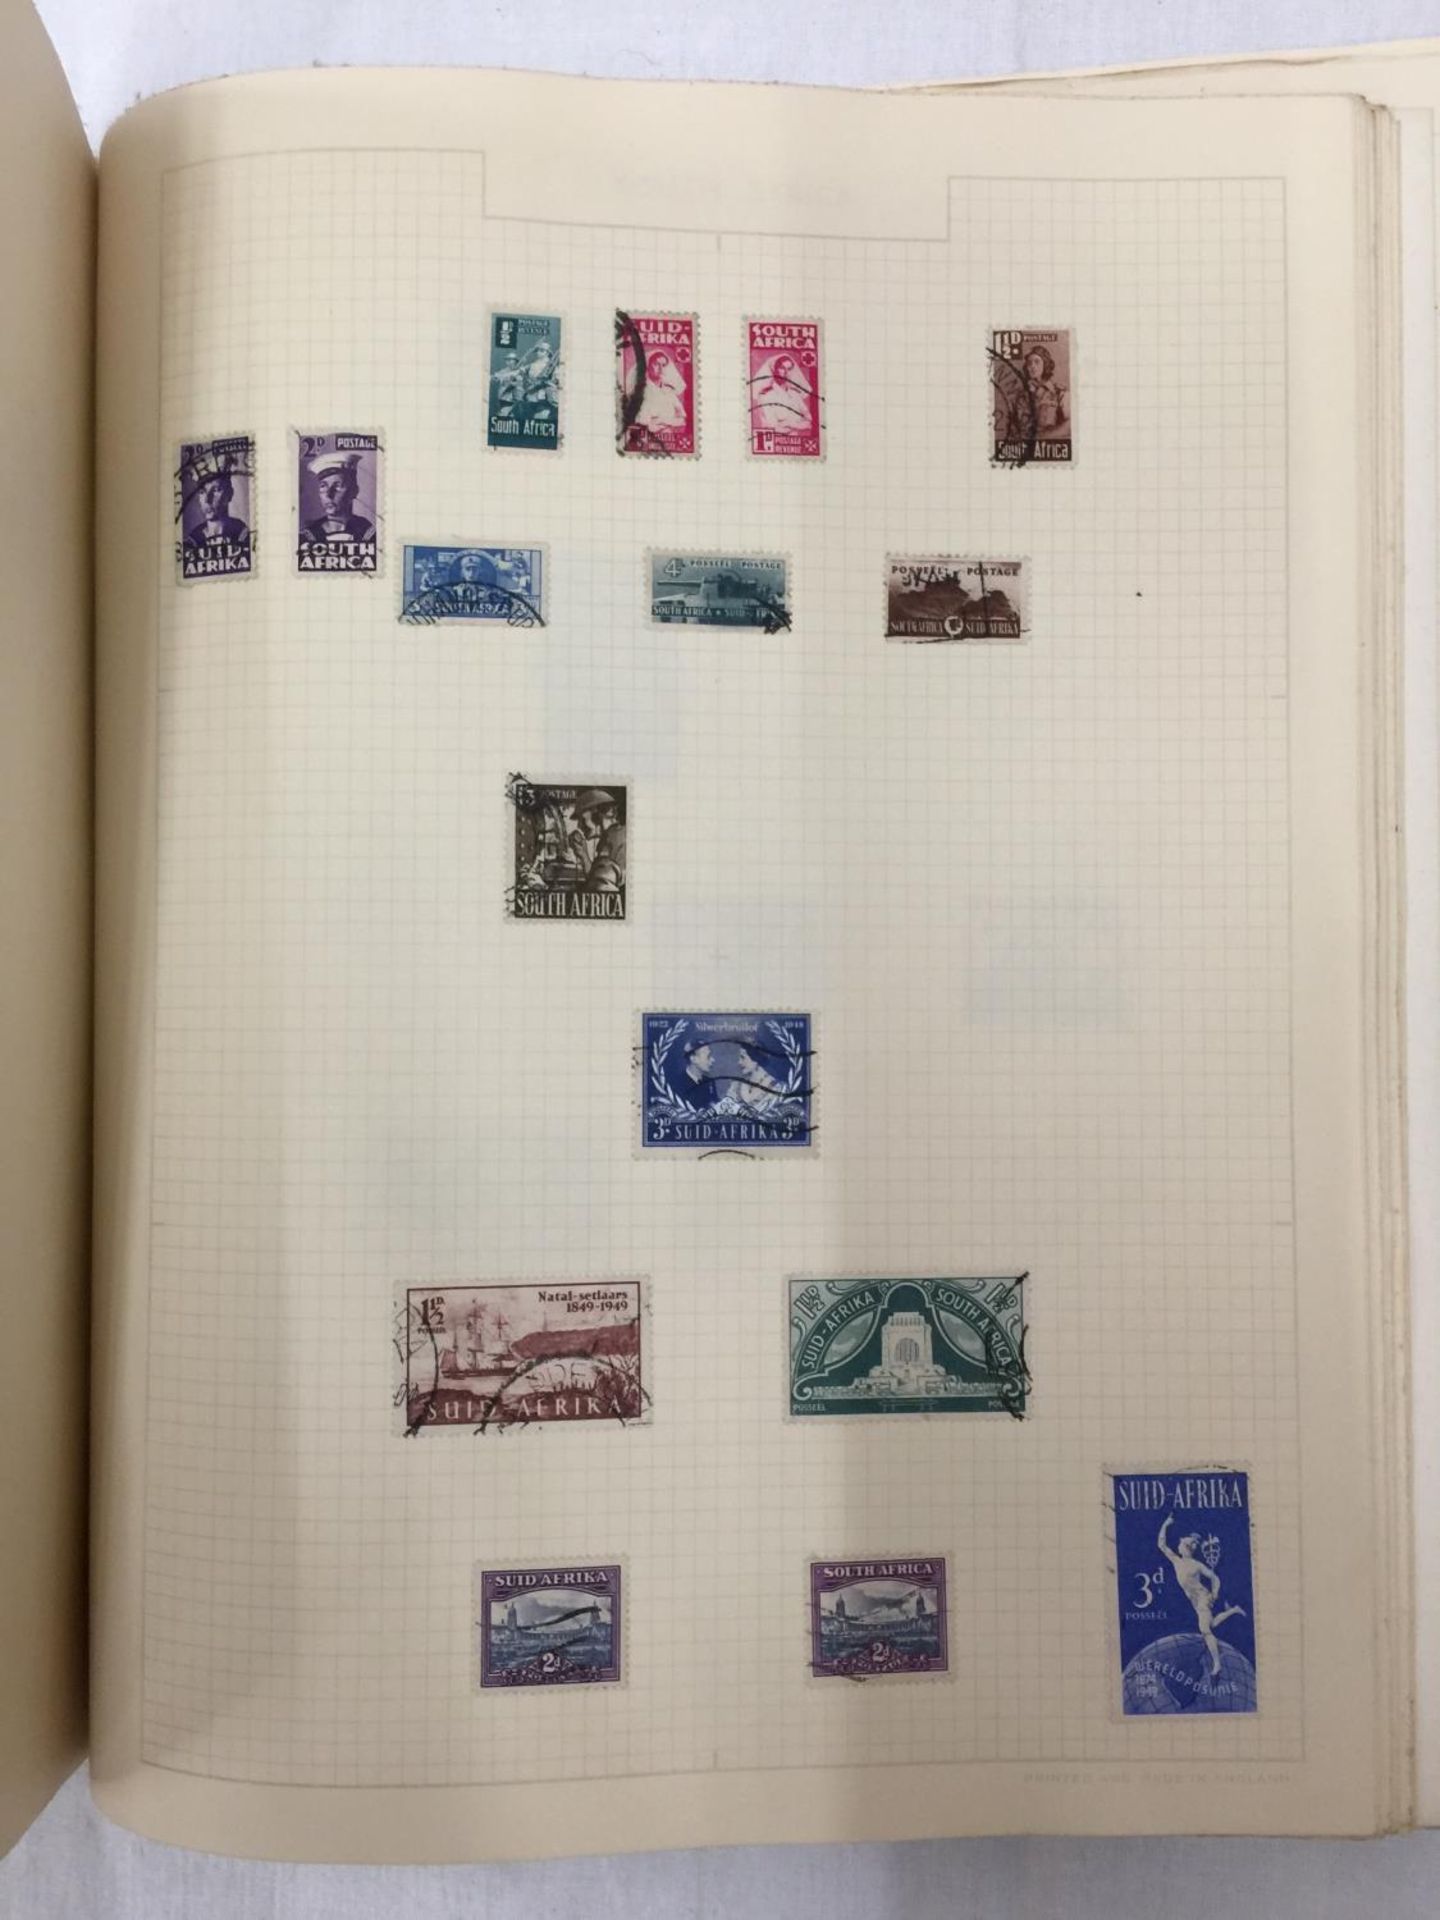 A COLLECTION OF BRITISH COMMONWEALTH STAMPS IN TWO VOLUMES FROM CANADA TO ZANZIBAR - Image 6 of 6